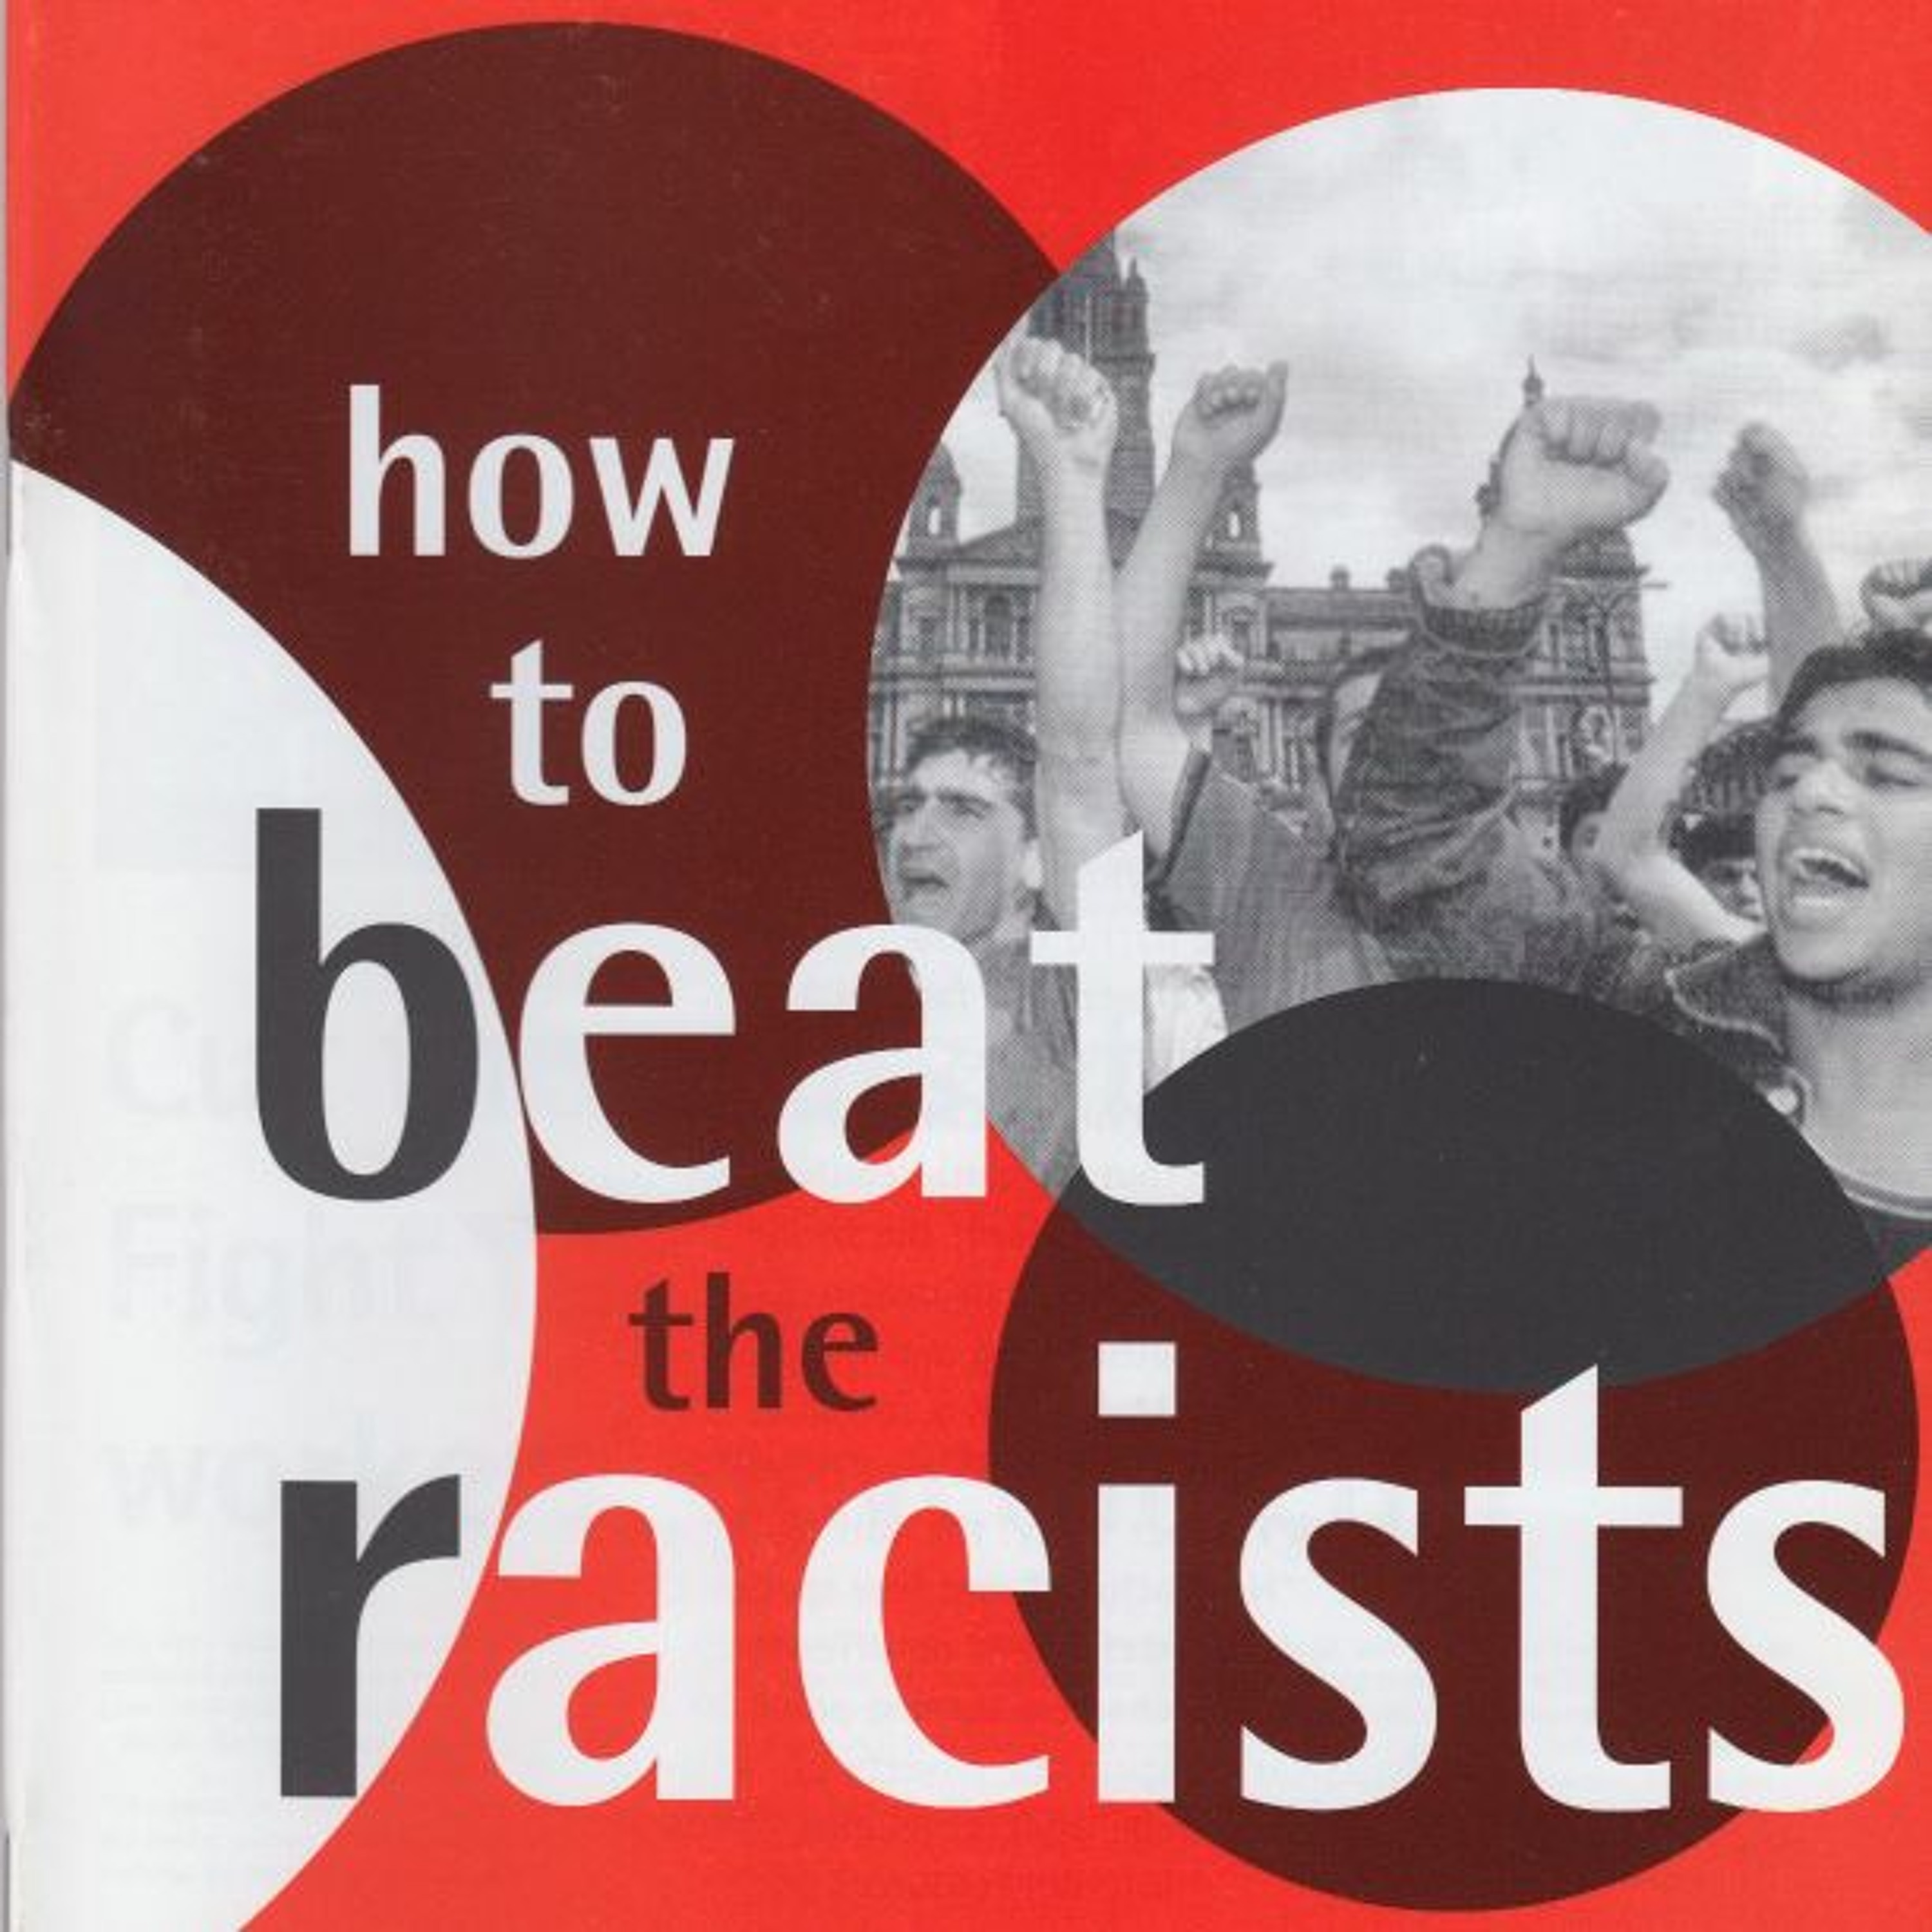 6 of 10 — How to beat the racists — Roots of antisemitism; Roots of Racism